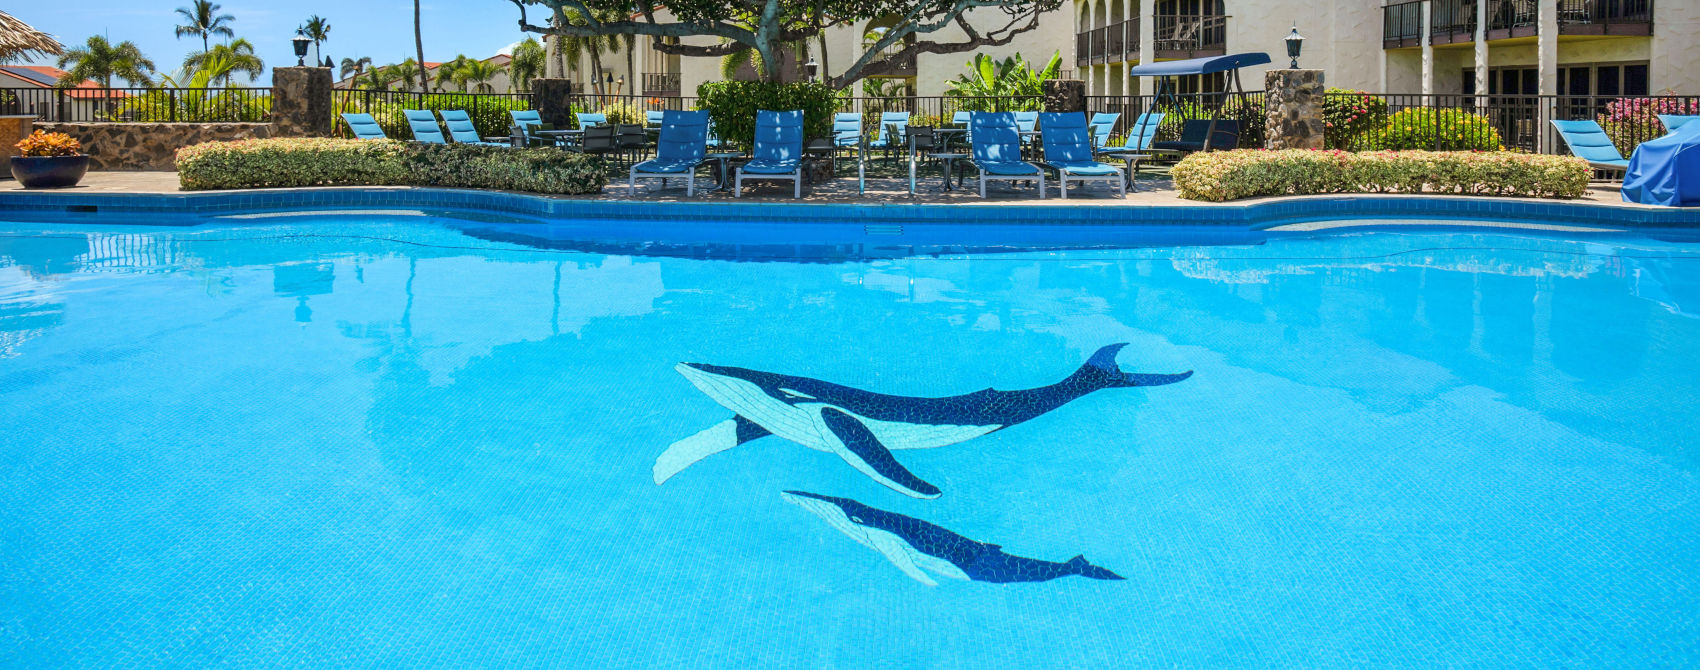 Pool at the Maui Hill with two whales in the pool bottom tile and blue padded lounge chairs under a lush green tree